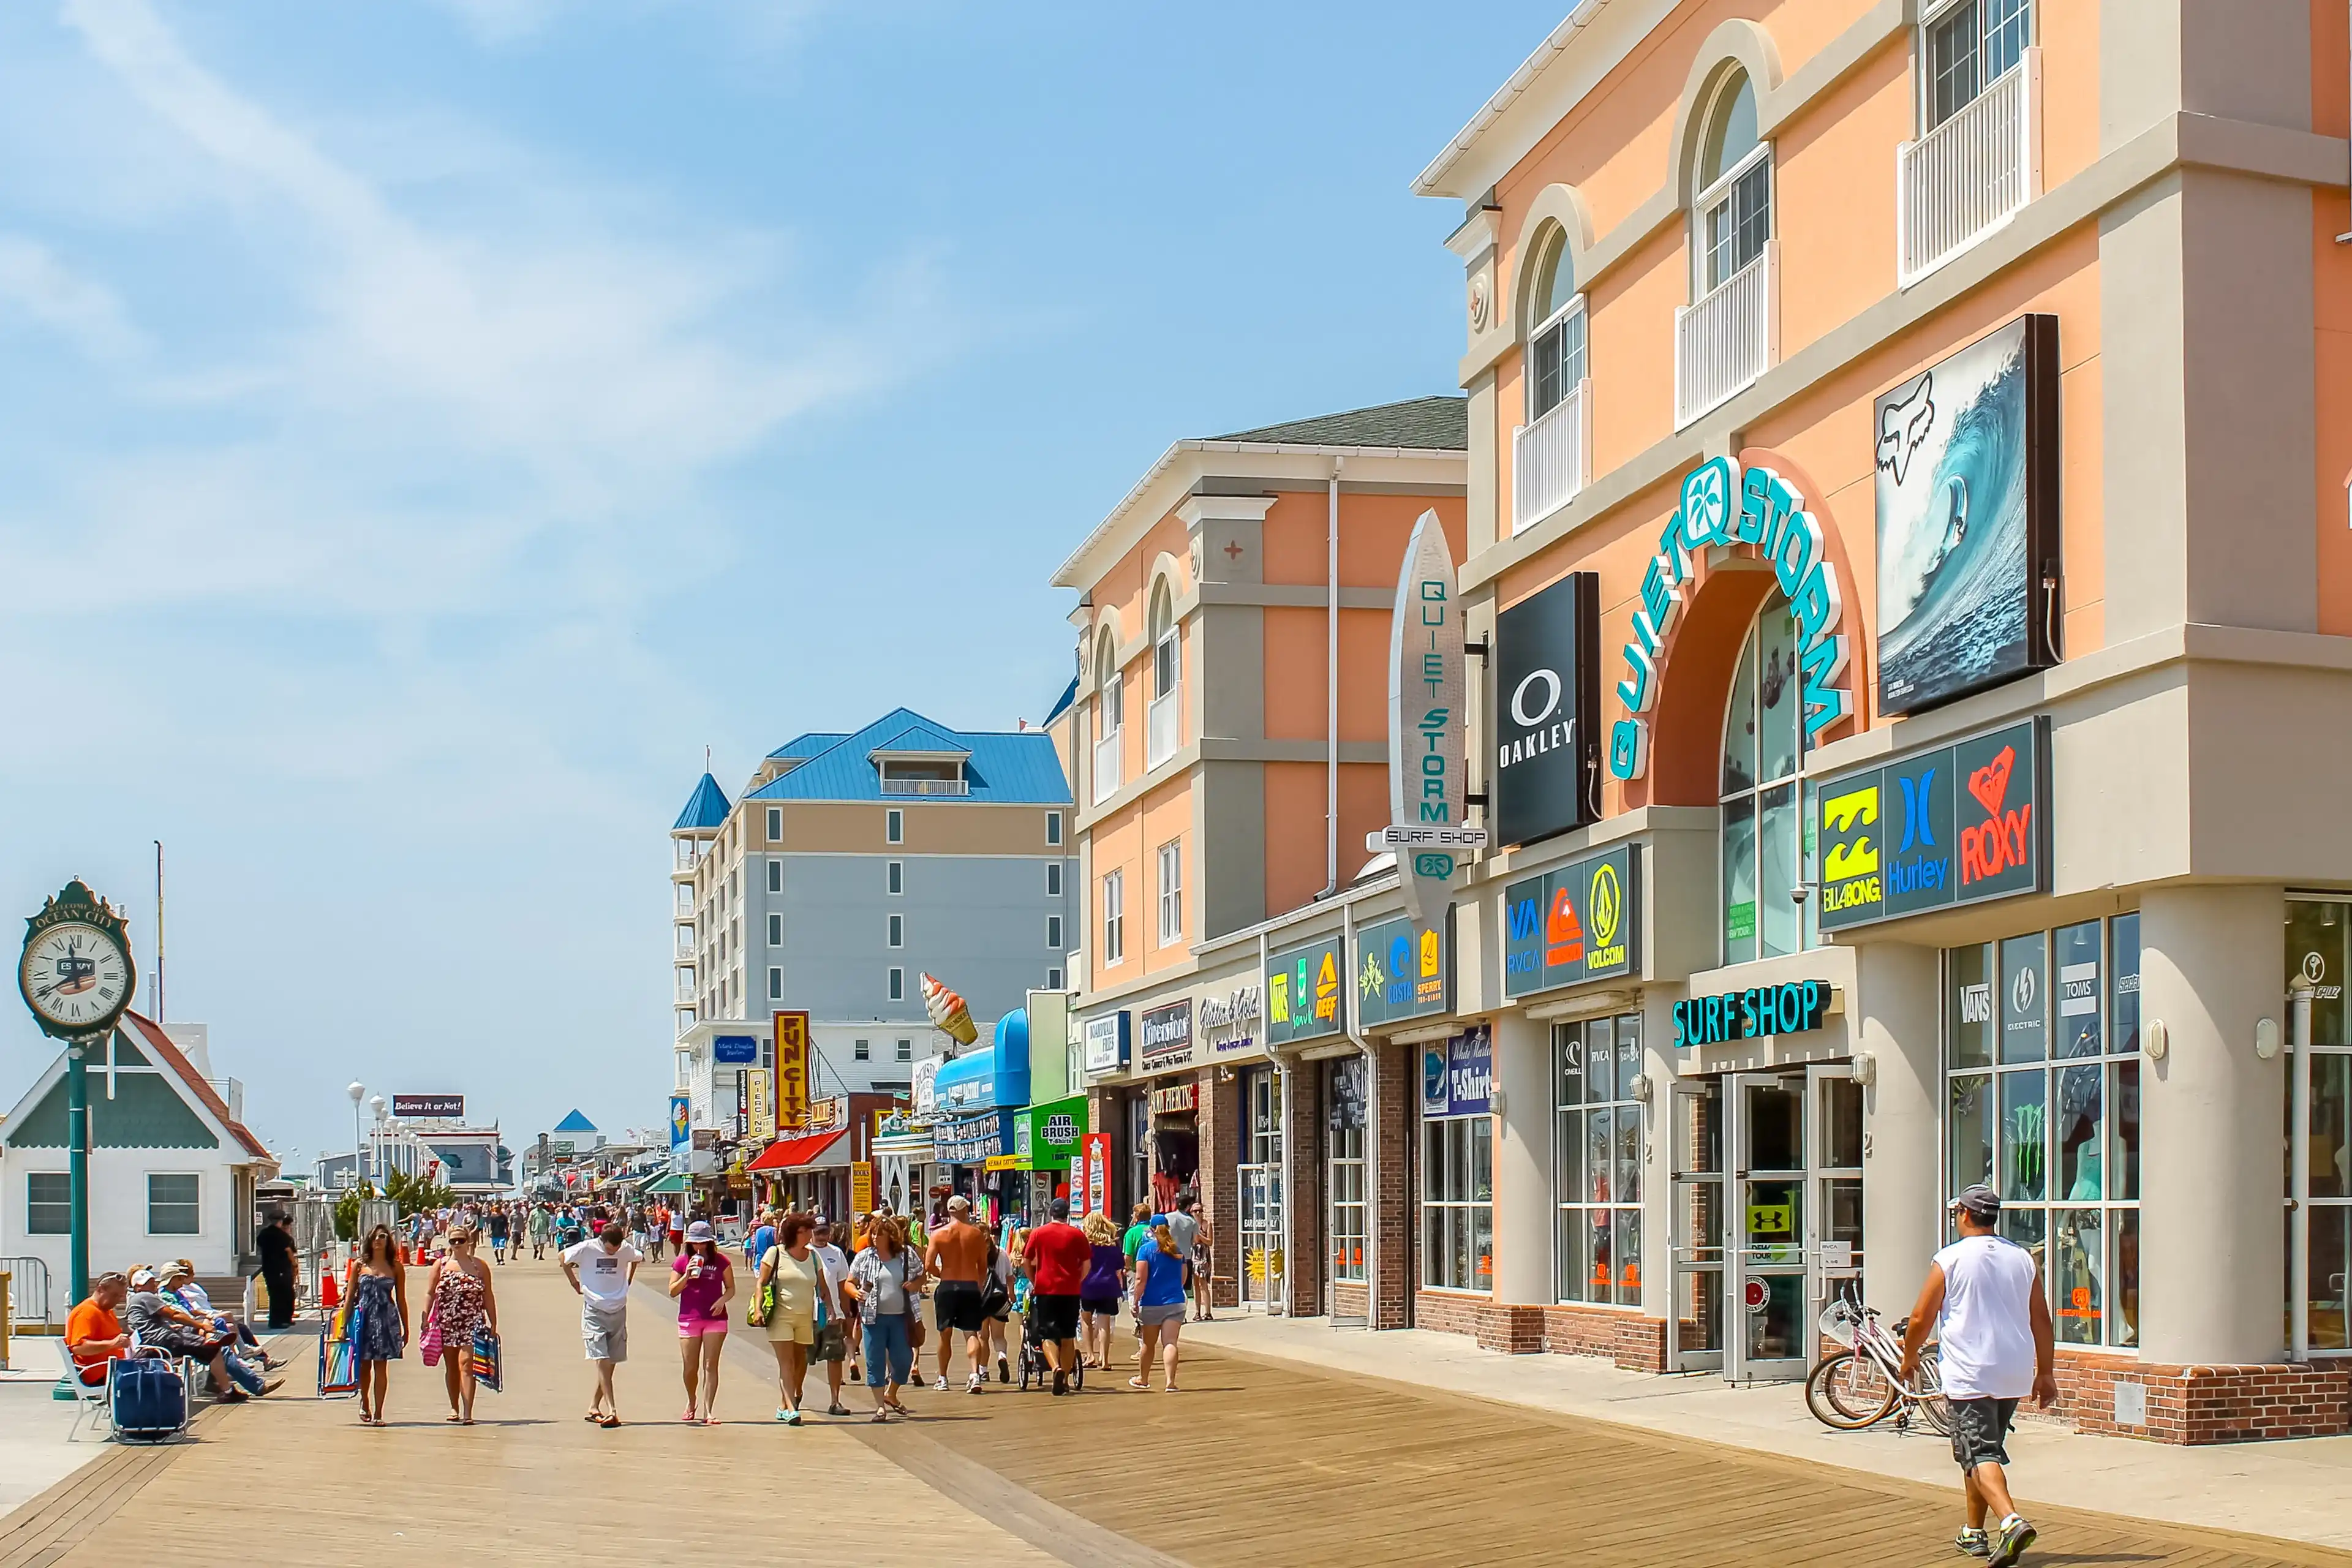 Best Ocean City hotels. Cheap hotels in Ocean City, Maryland, United States